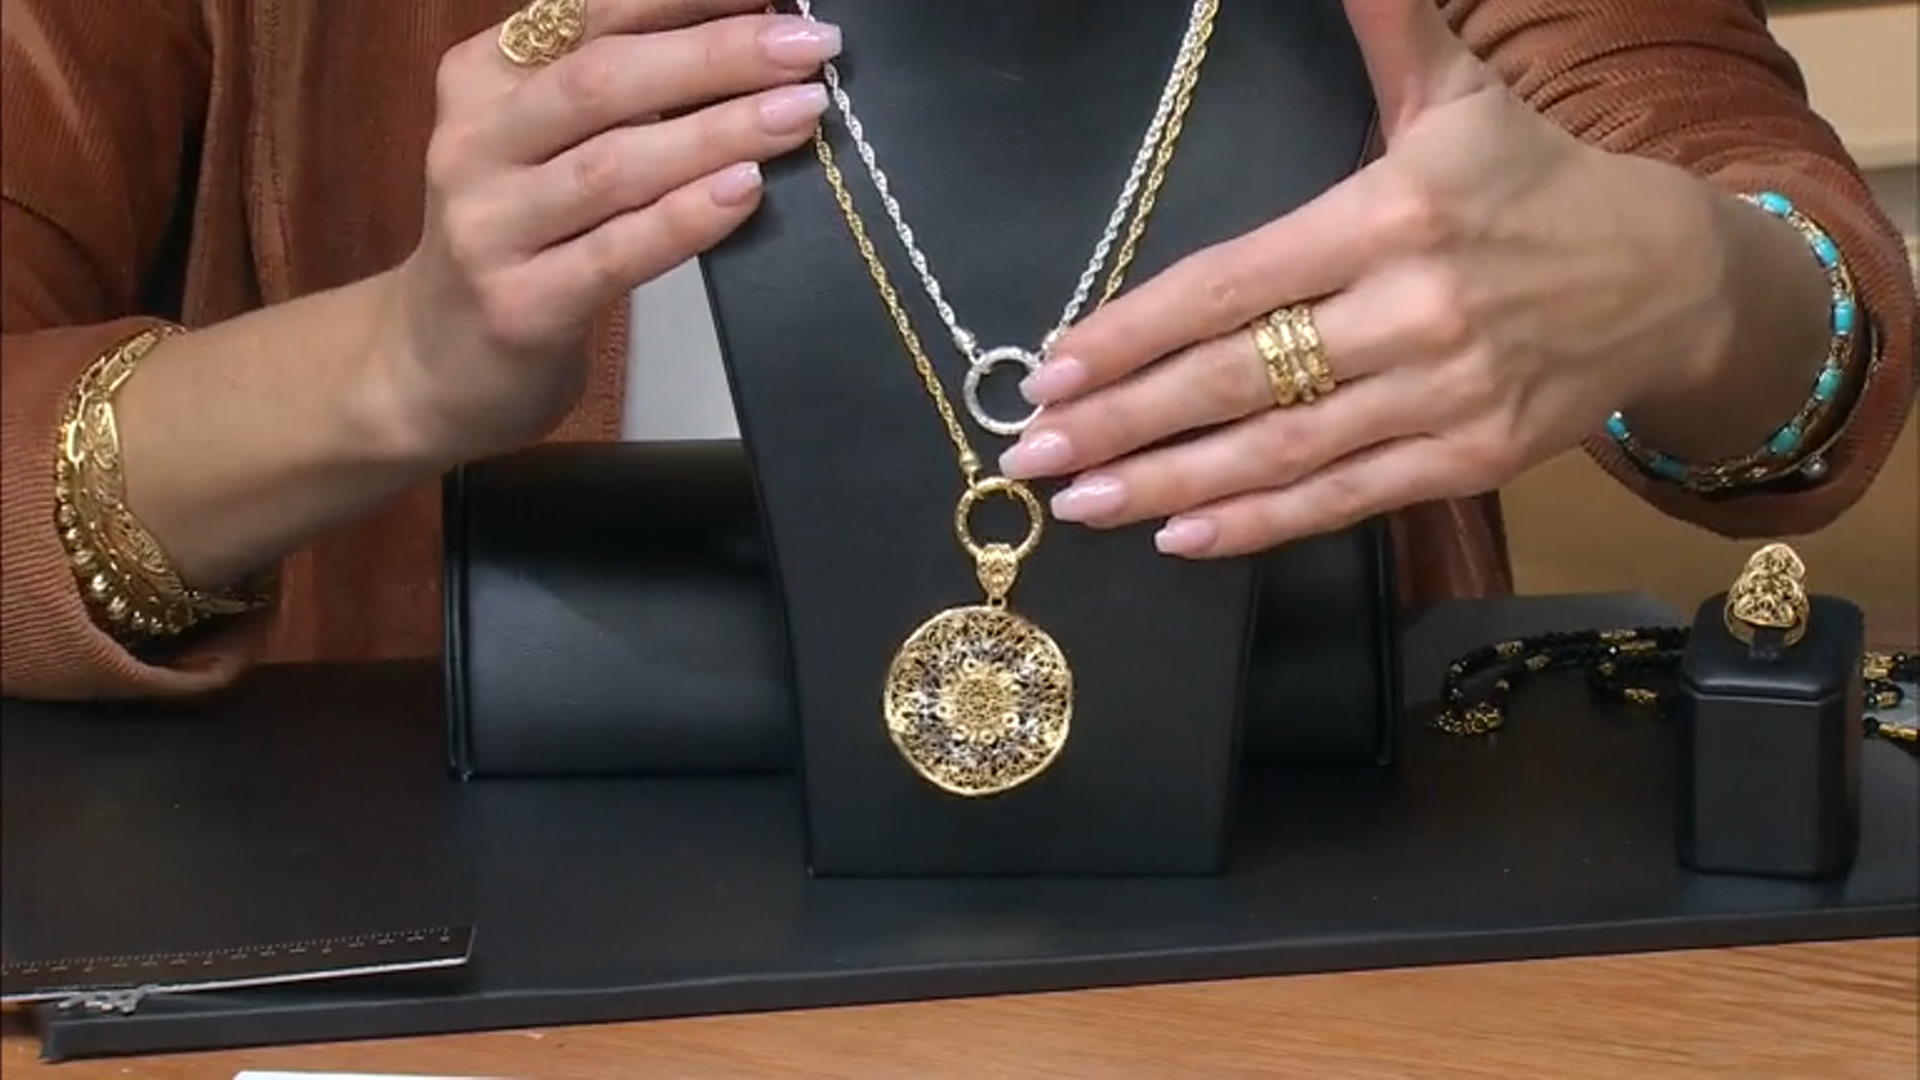 18K Yellow Gold Over Sterling Silver Chain Necklace Video Thumbnail